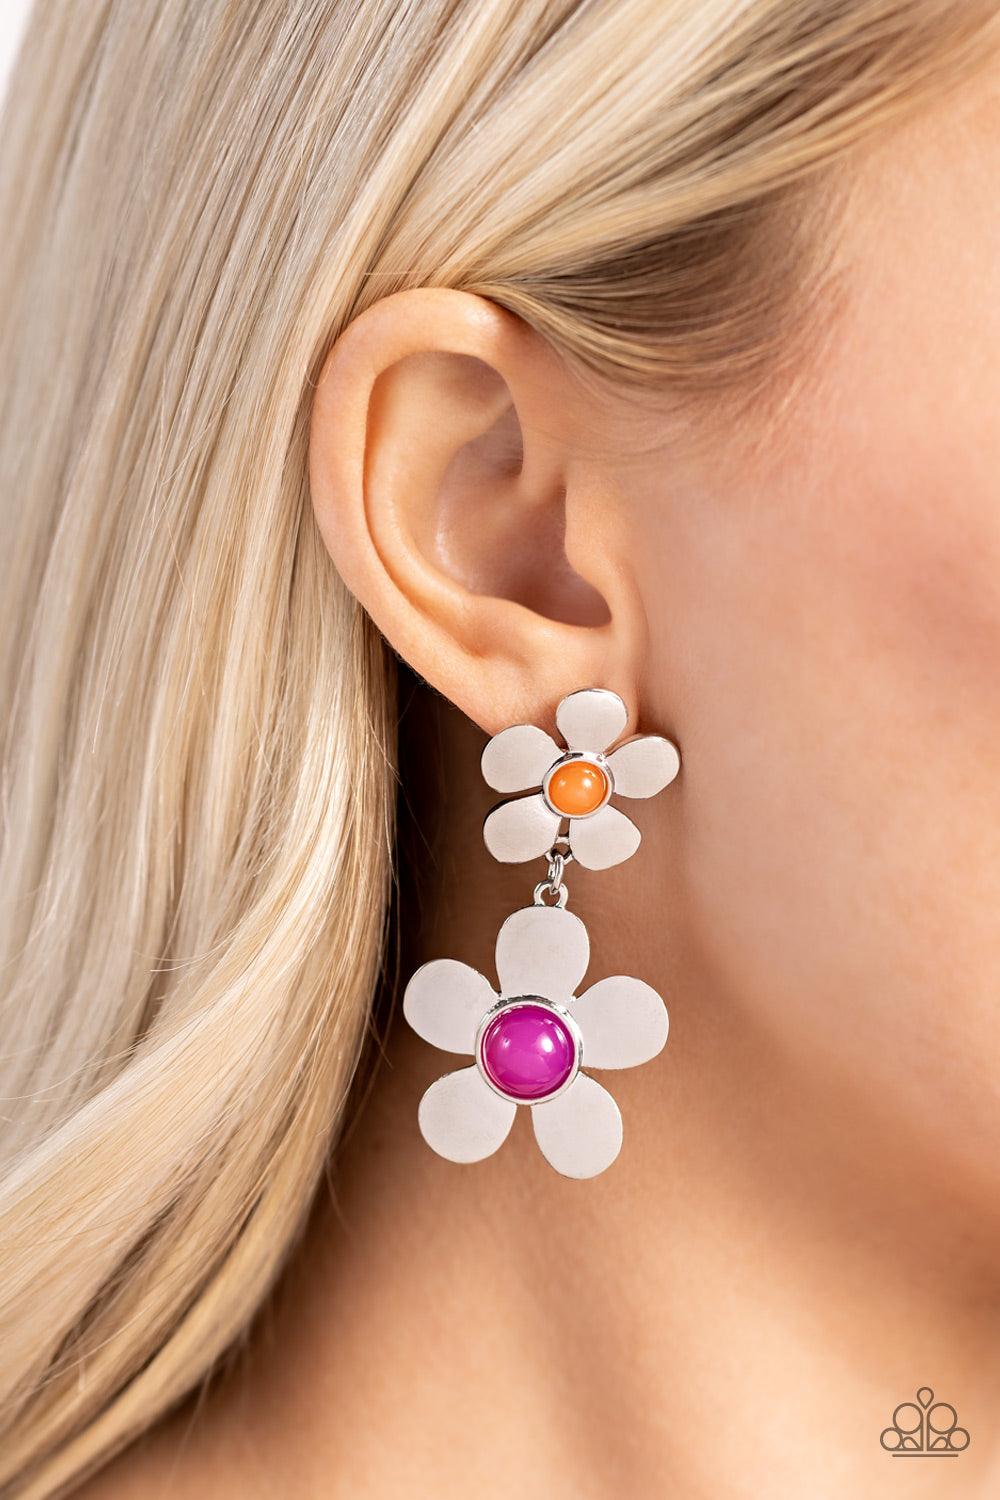 Paparazzi Accessories - Fashionable Florals - Pink Earrings - Bling by JessieK